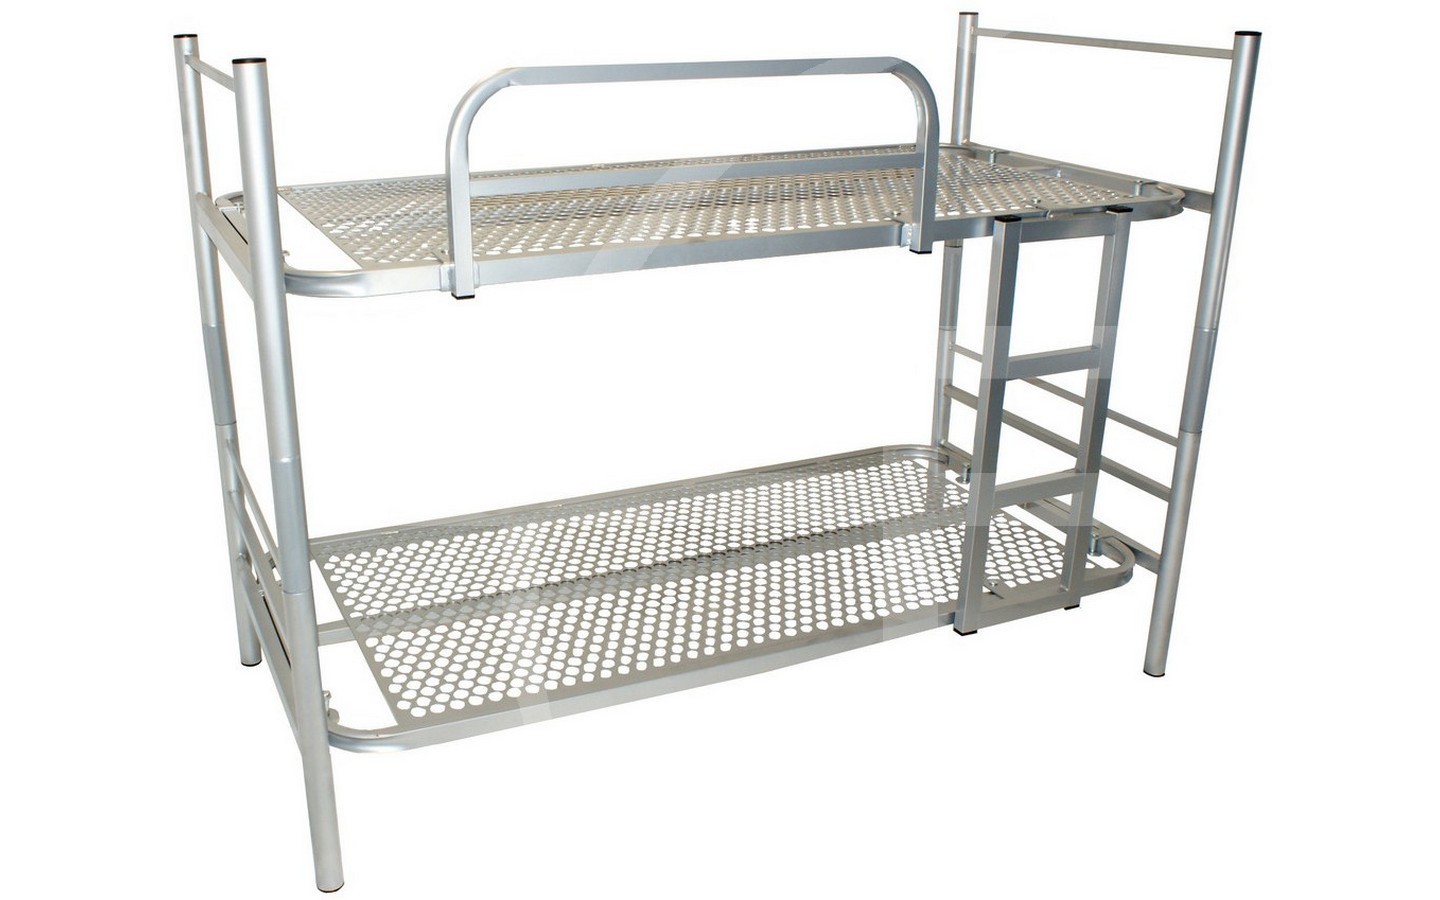 Bunk Beds For S Steel, Army Bunk Bed Mattress